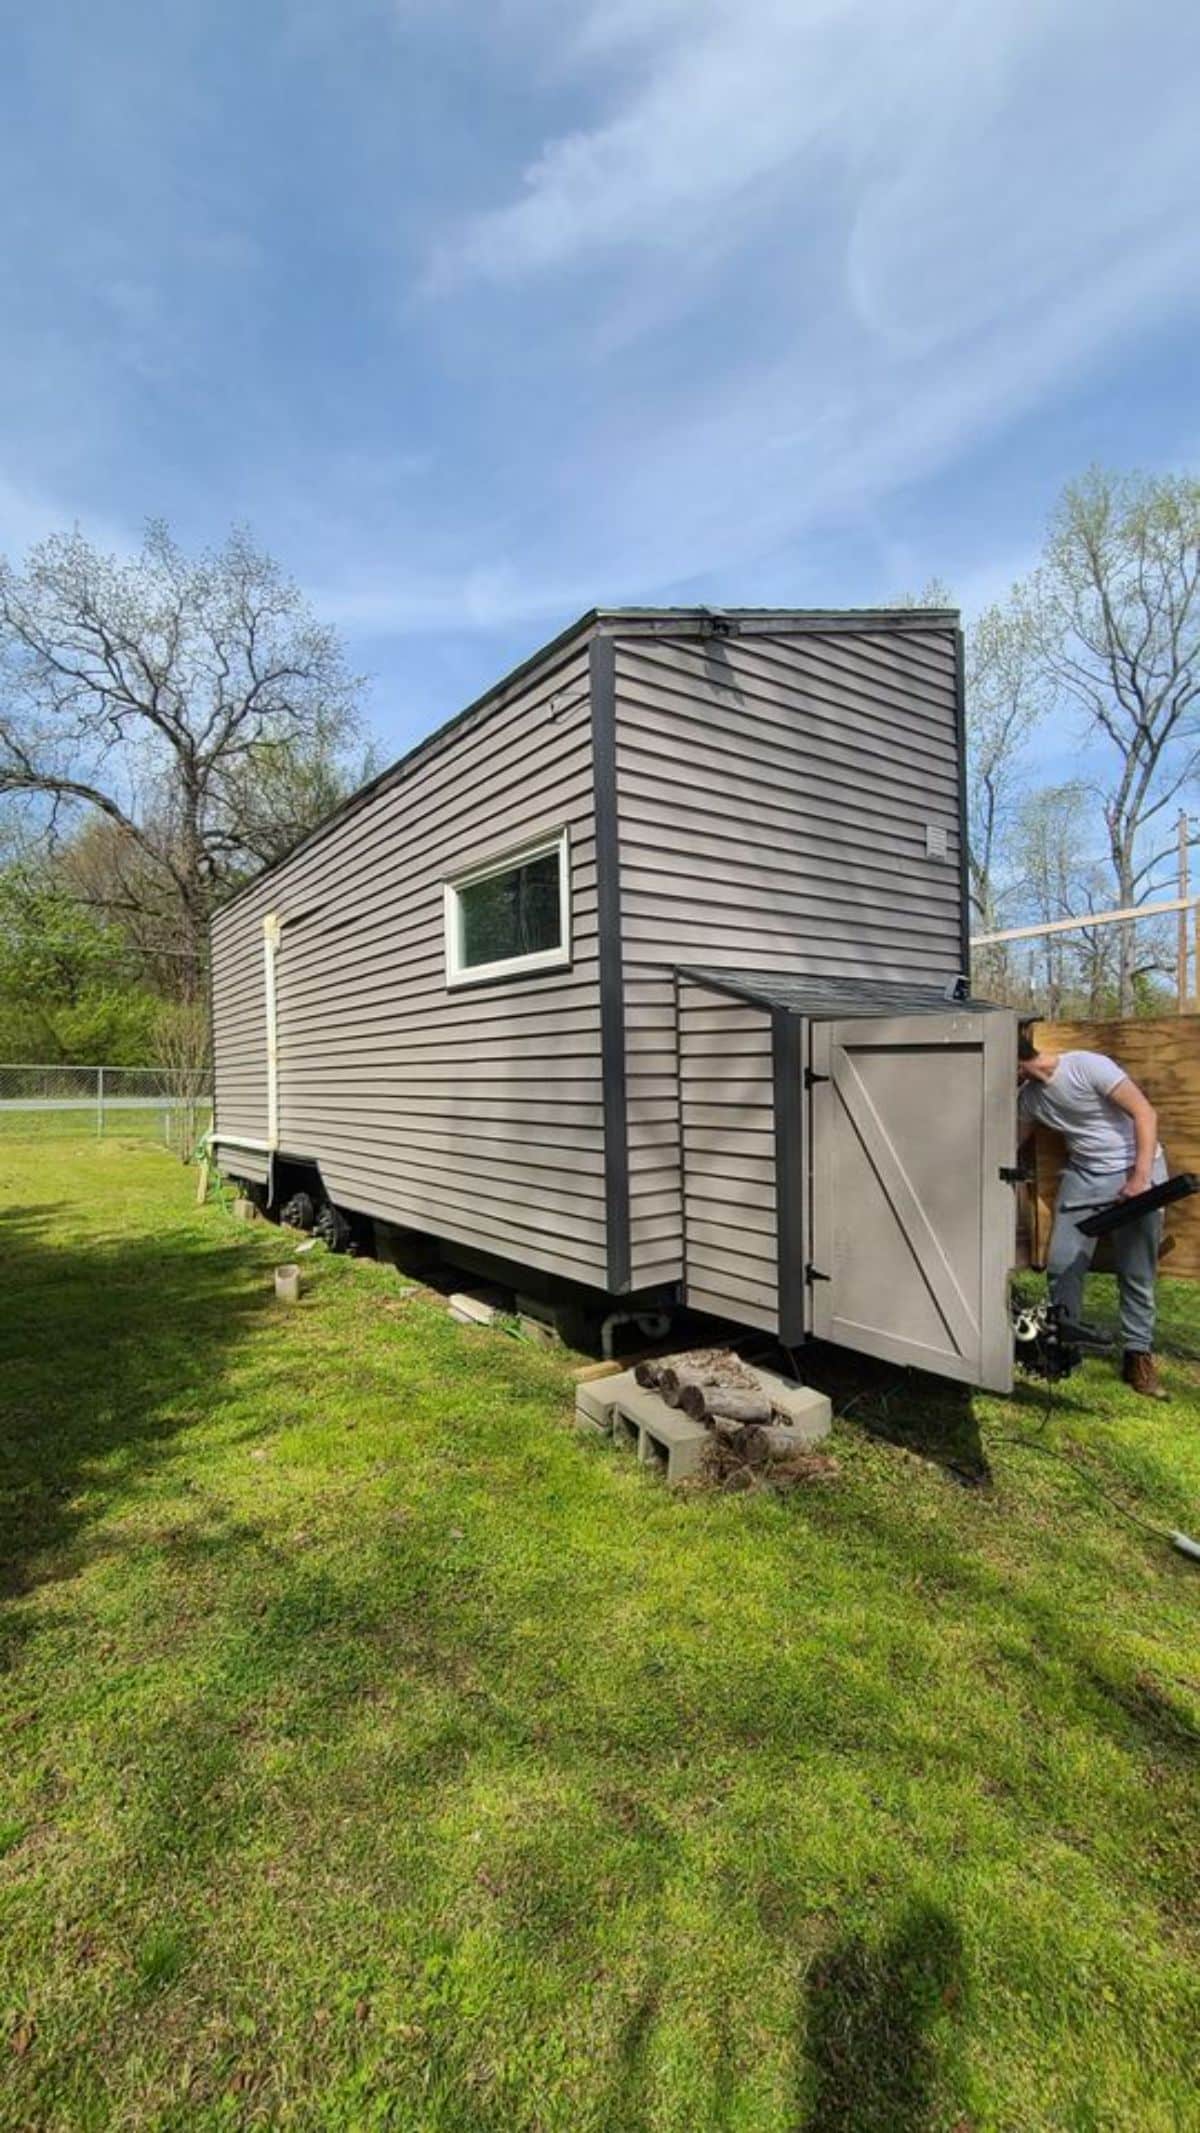 beige siding on tiny house on green grass lot